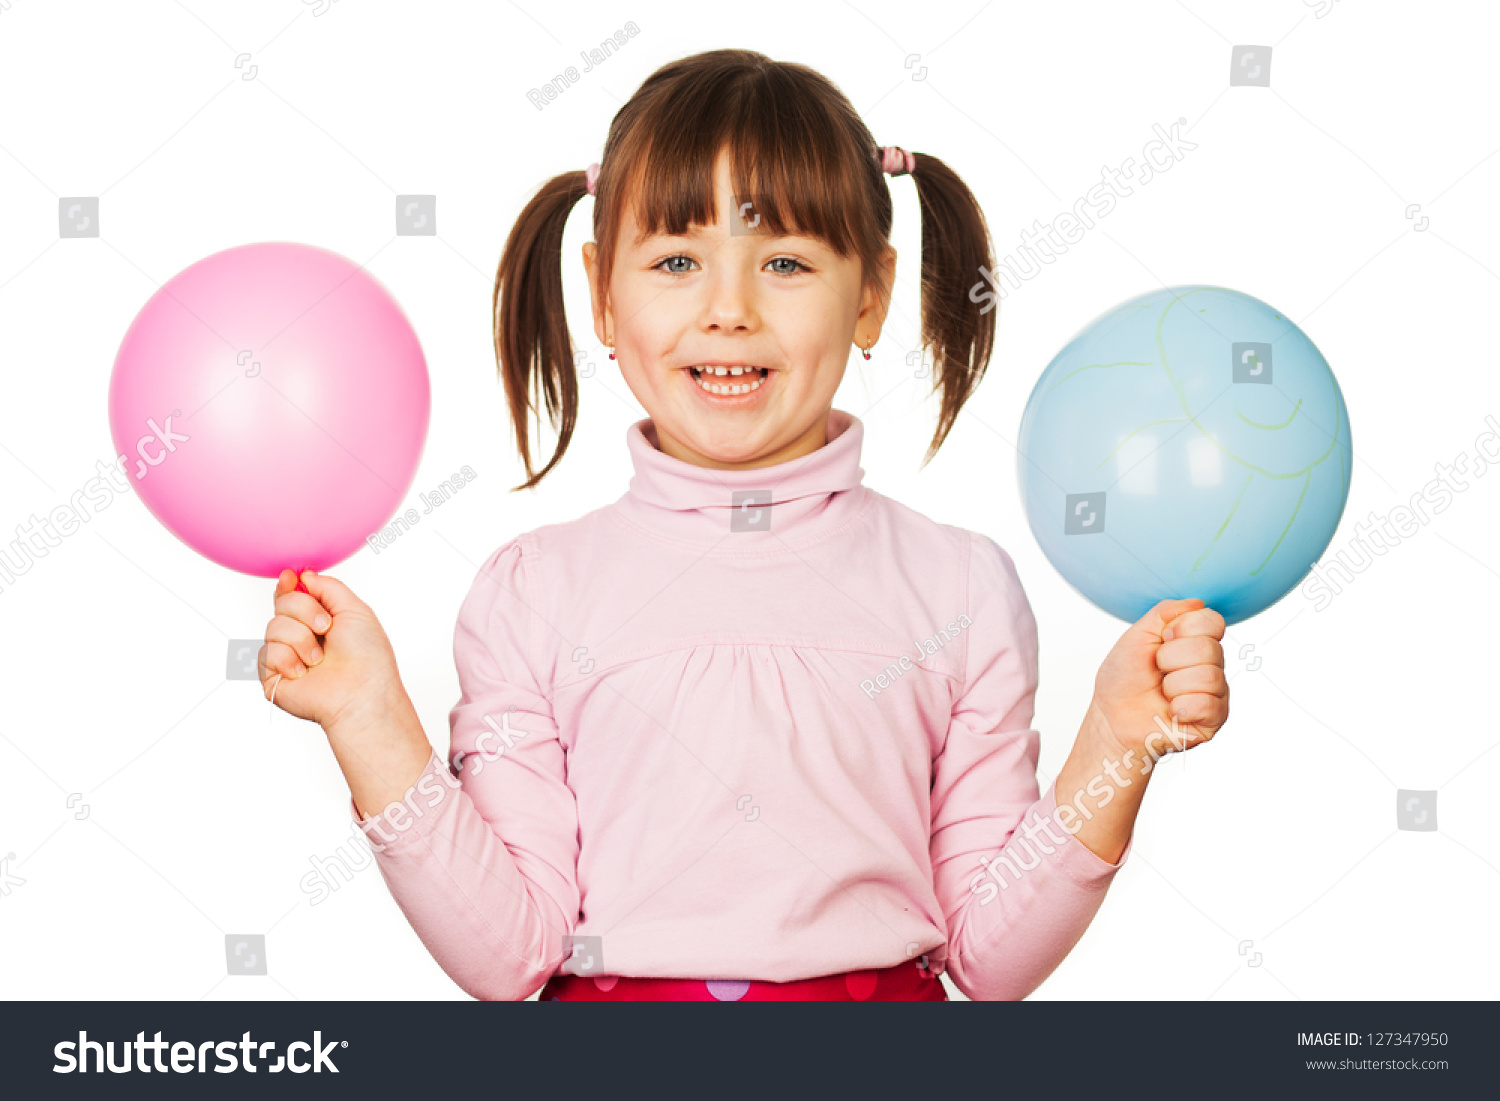 Portrait of happy woman with blue and pink balloons, white background. #127347950